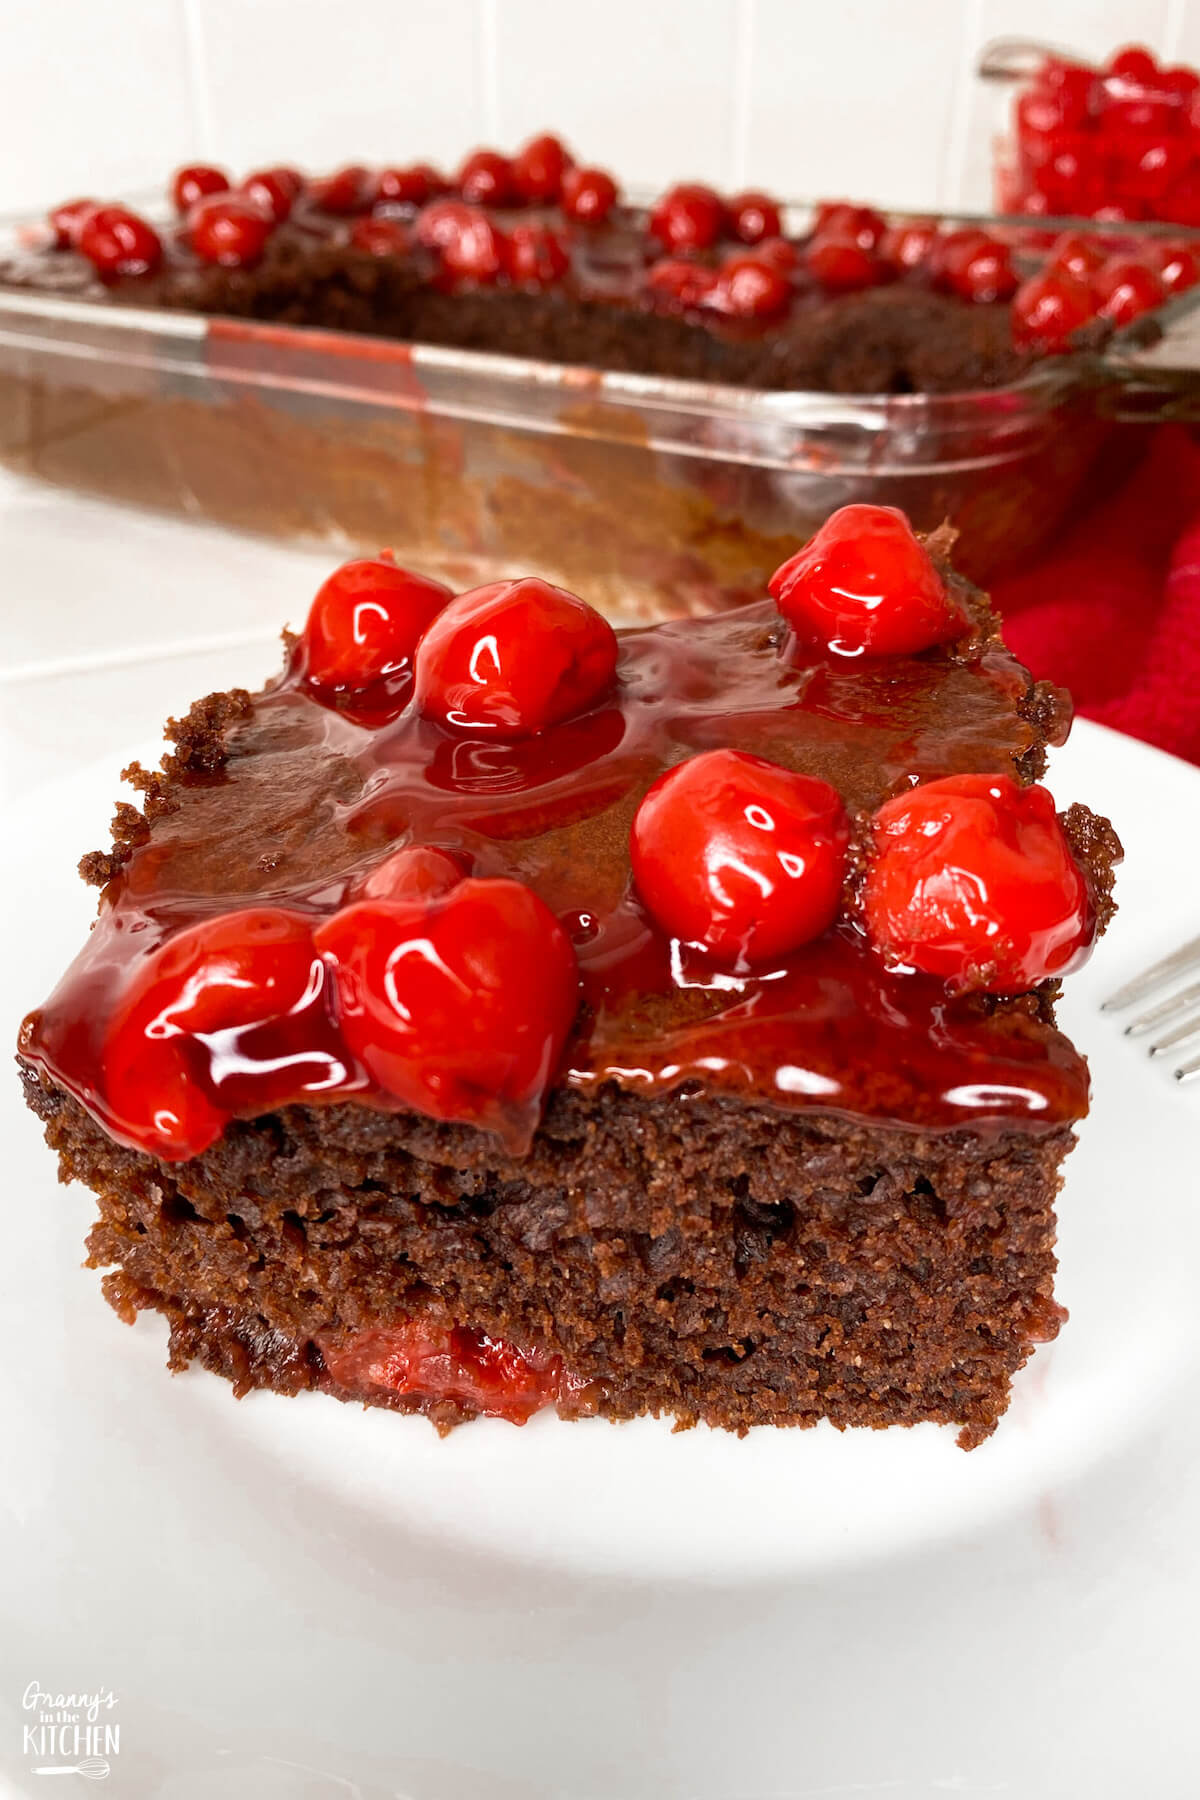 slice of chocolate cake with cherry pie filling on top